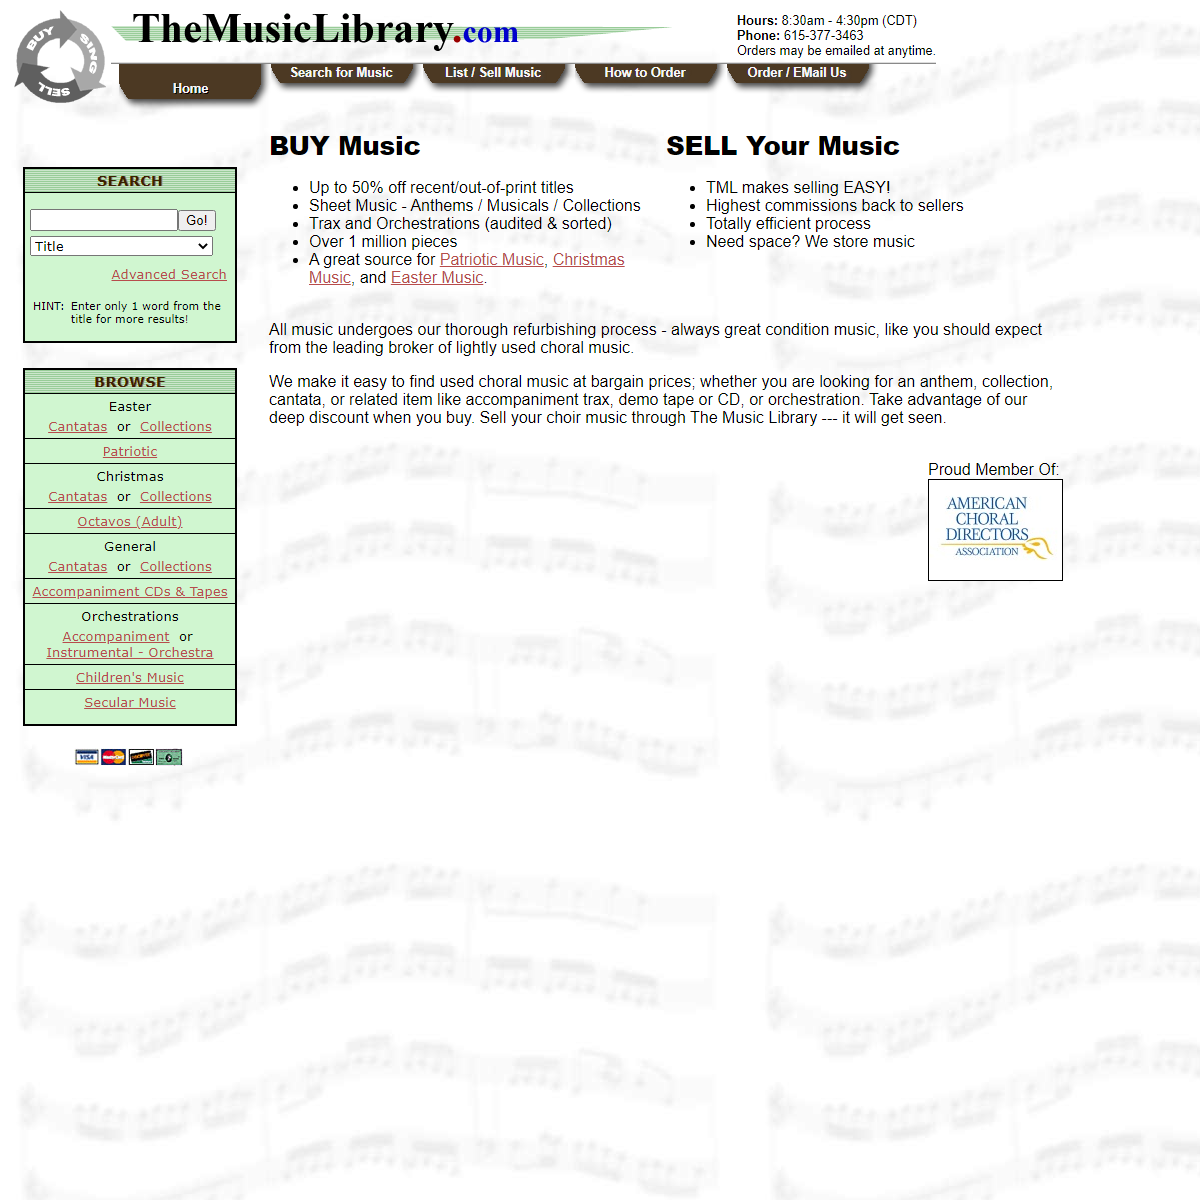 A complete backup of http://www.themusiclibrary.com/